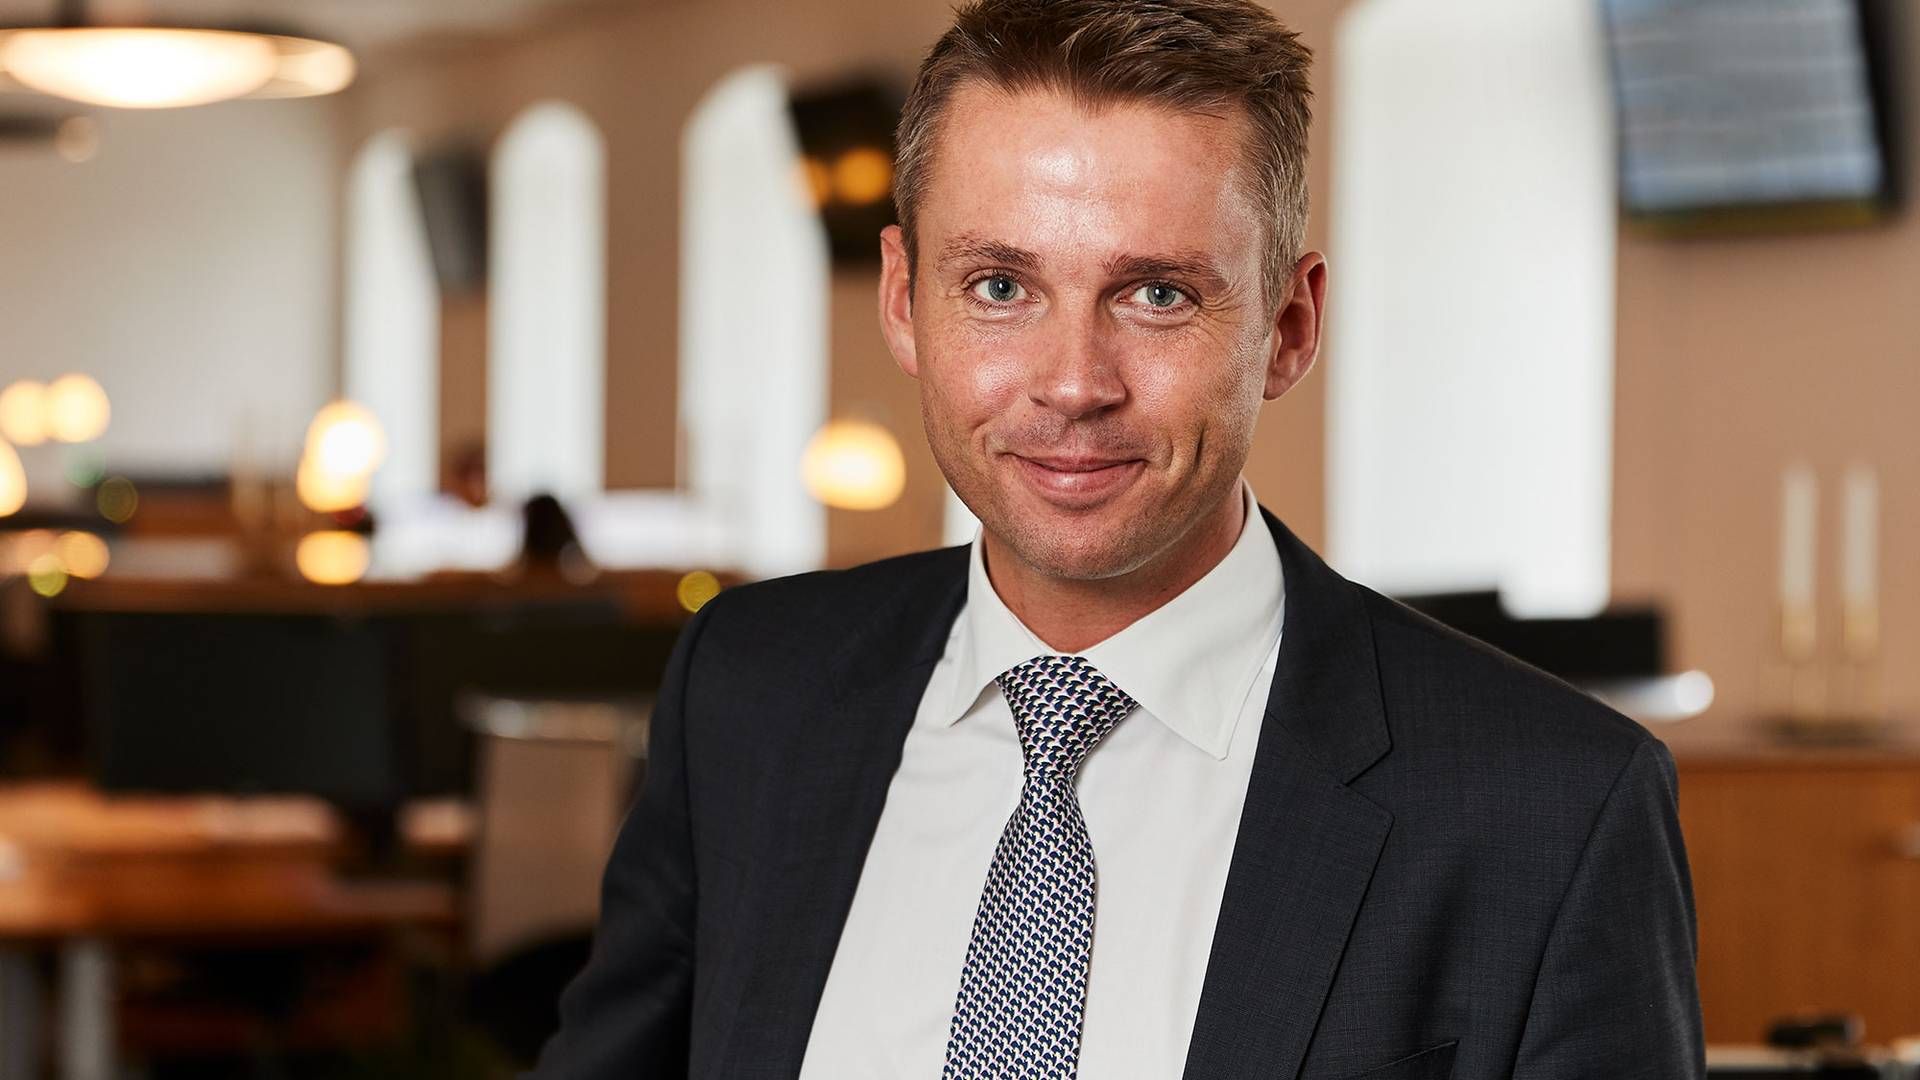 Profits in Anders Østergaard's private investment company have increased eightfold in 2022, and equity has reached DKK 2.2 billion. | Photo: Pr / Monjasa